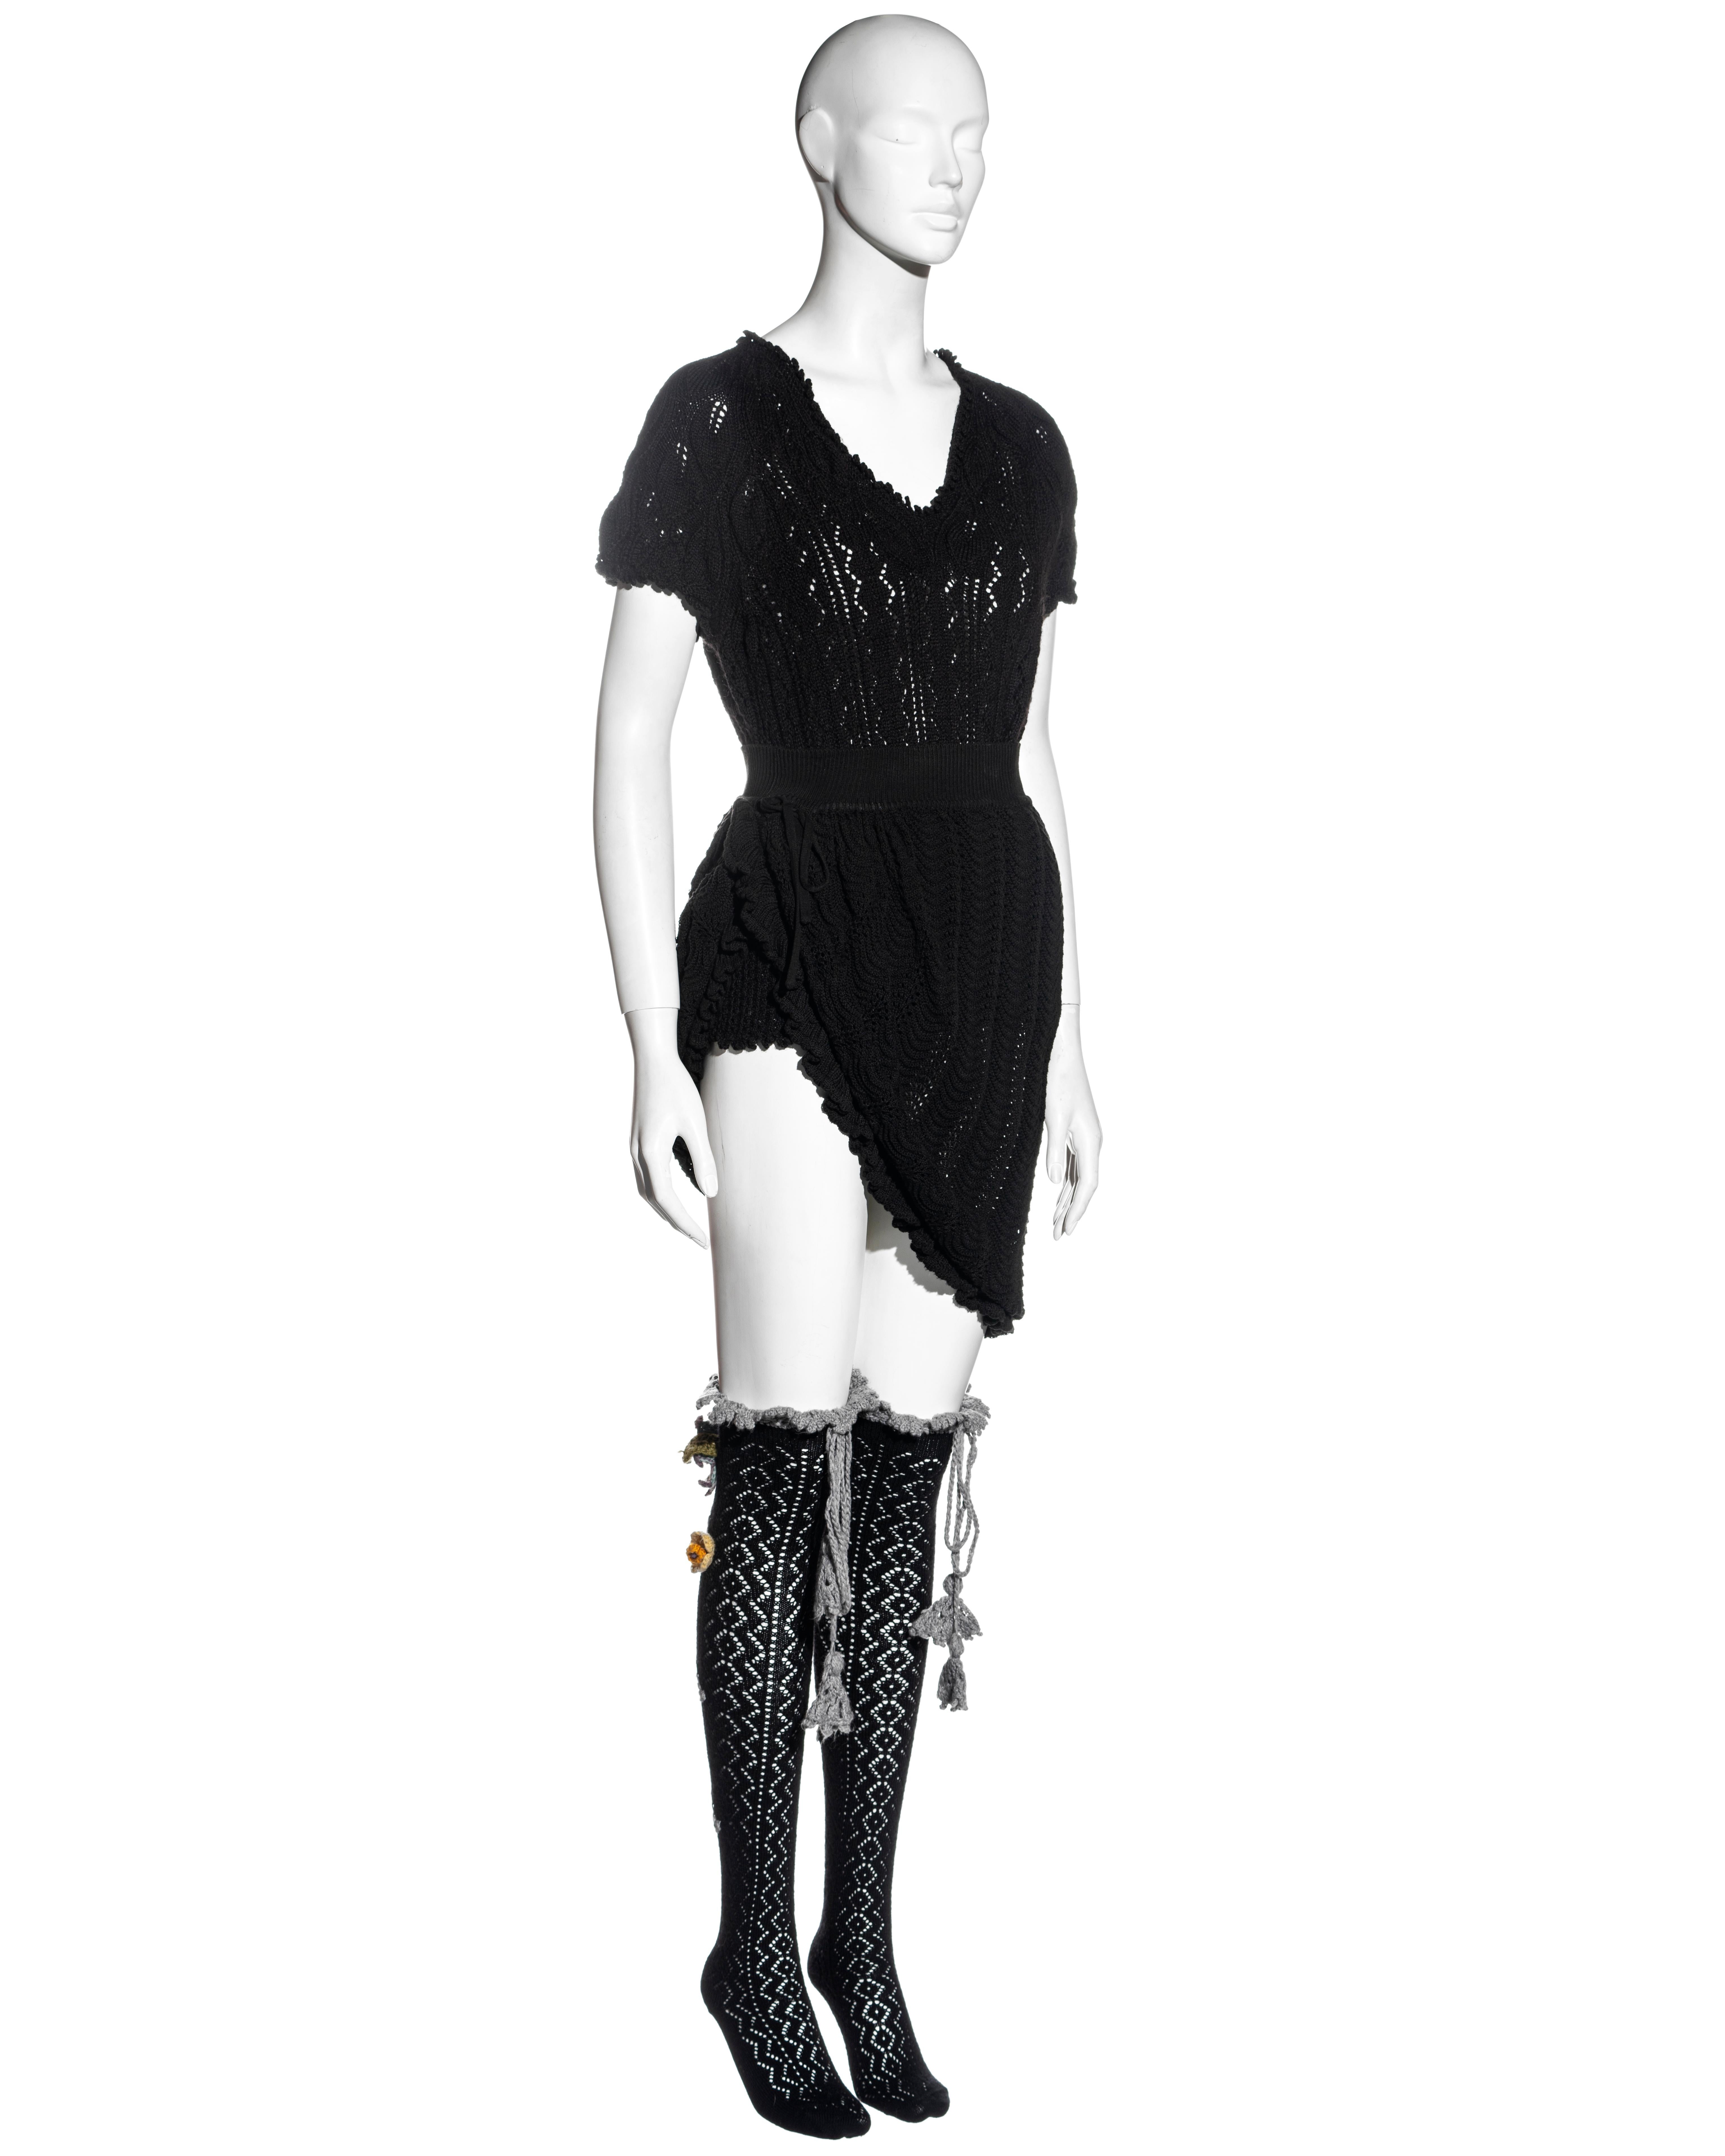 ▪ Vivienne Westwood black crochet-knit 3-piece set
▪ Short-sleeved wool sweater top 
▪ High-slit cotton skirt with draw string fastening and ruffled hemline 
▪ Matching open-knit knee-high socks with colourful crochet flowers 
▪ Size: Medium
▪